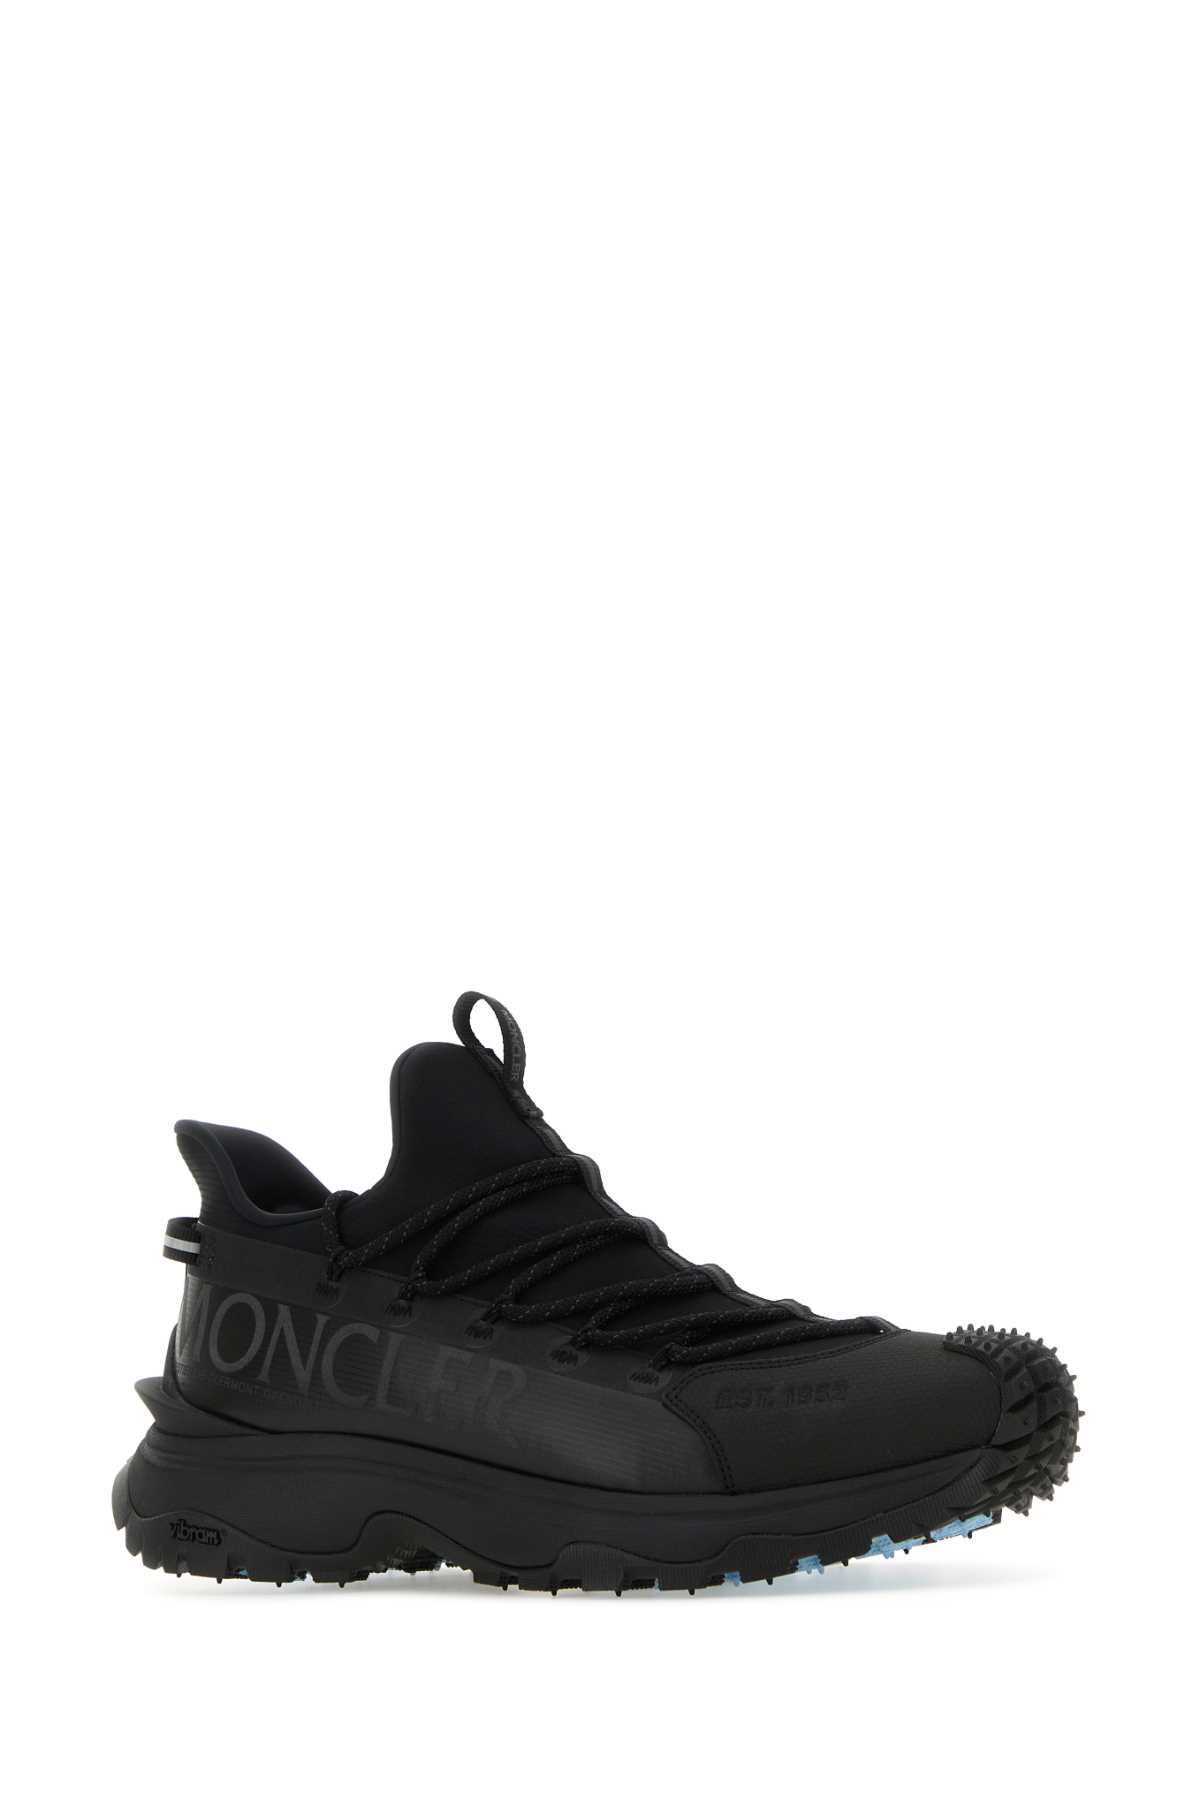 MONCLER BLACK FABRIC AND RUBBER TRAILGRIP LITE2 SNEAKERS